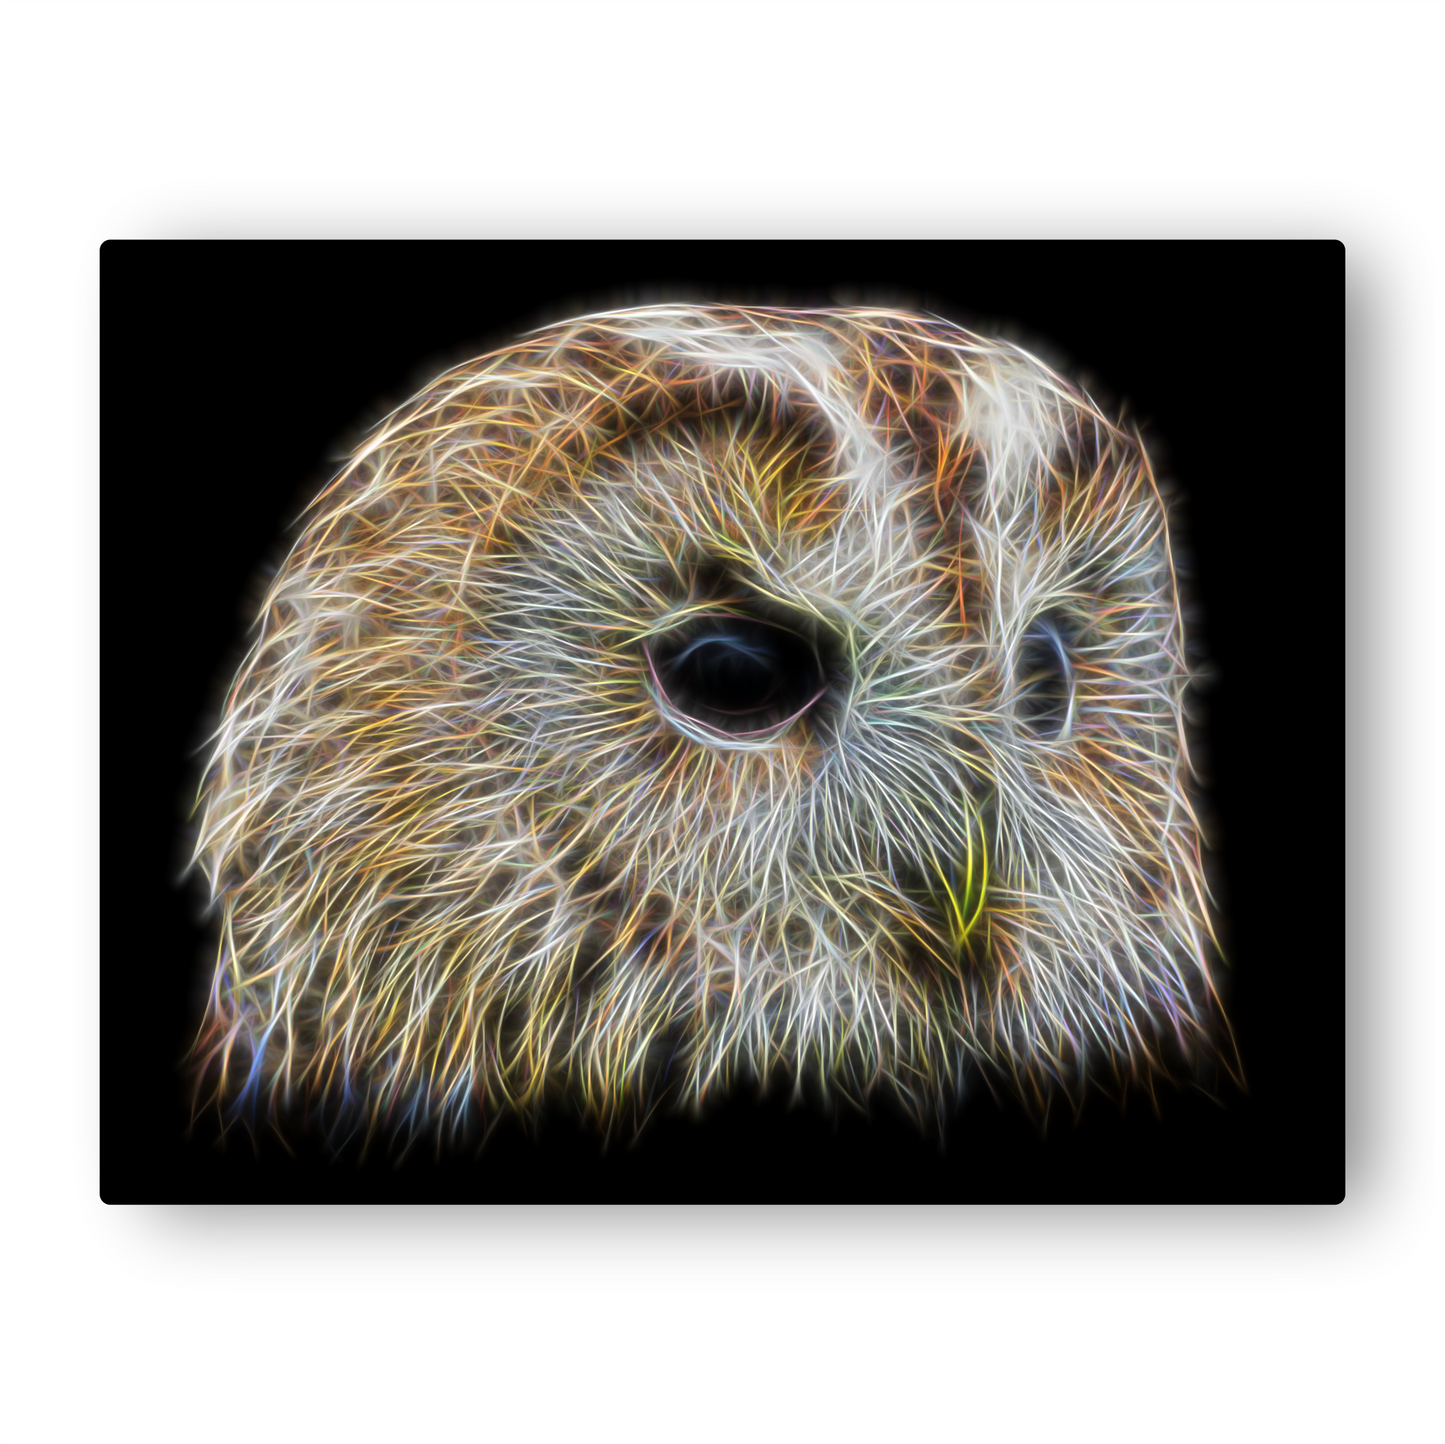 Tawny Owl Metal Wall Plaque with Fractal Art Design